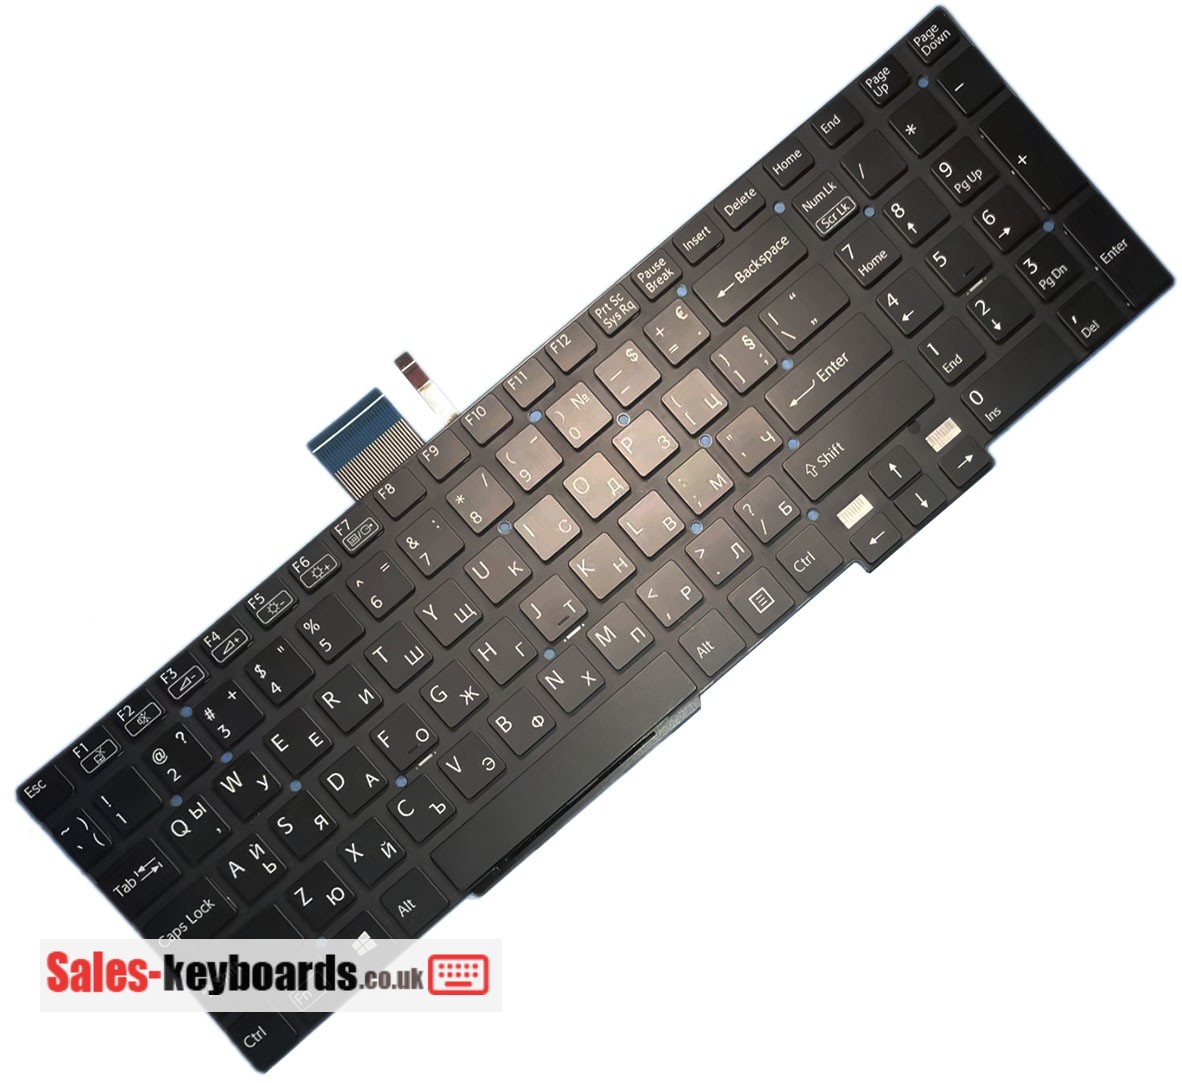 Sony VAIO SVT15114CXS Keyboard replacement